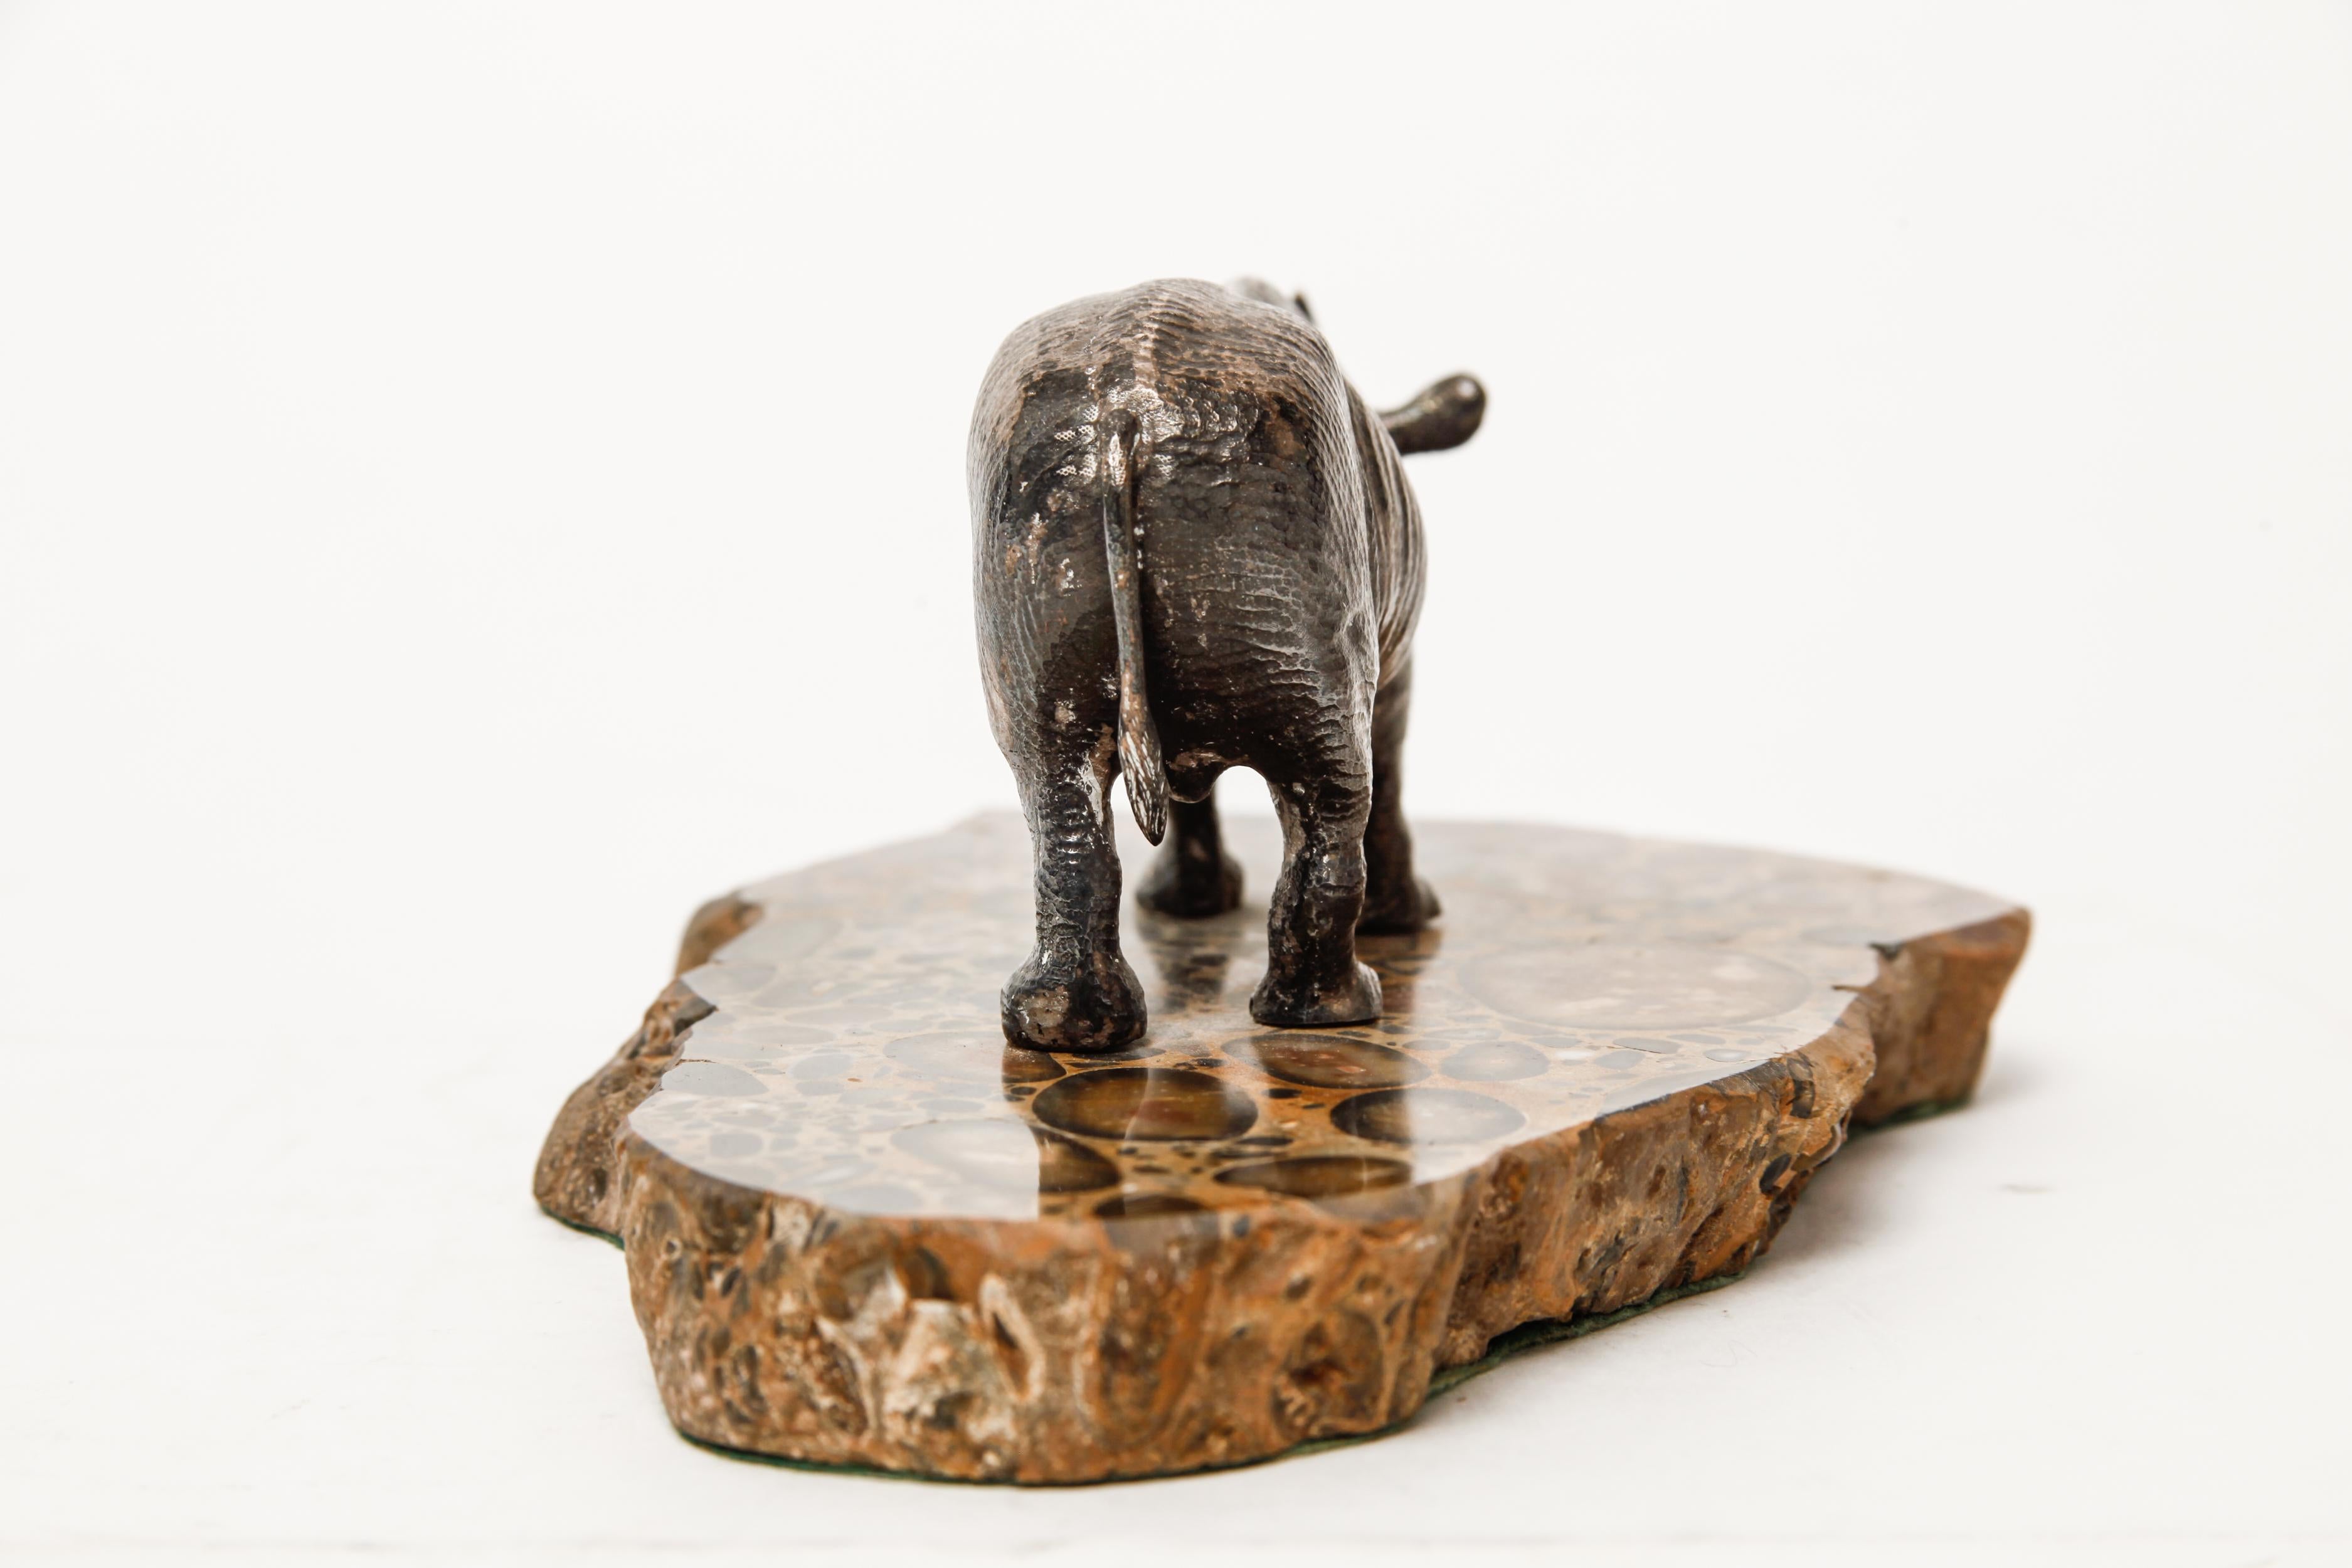 Mid-Century Modern silver plated sculpture of a rhinoceros standing atop a base made of pudding-stone marble. The piece is in great vintage condition with age-related wear and some loss to the silver plating.